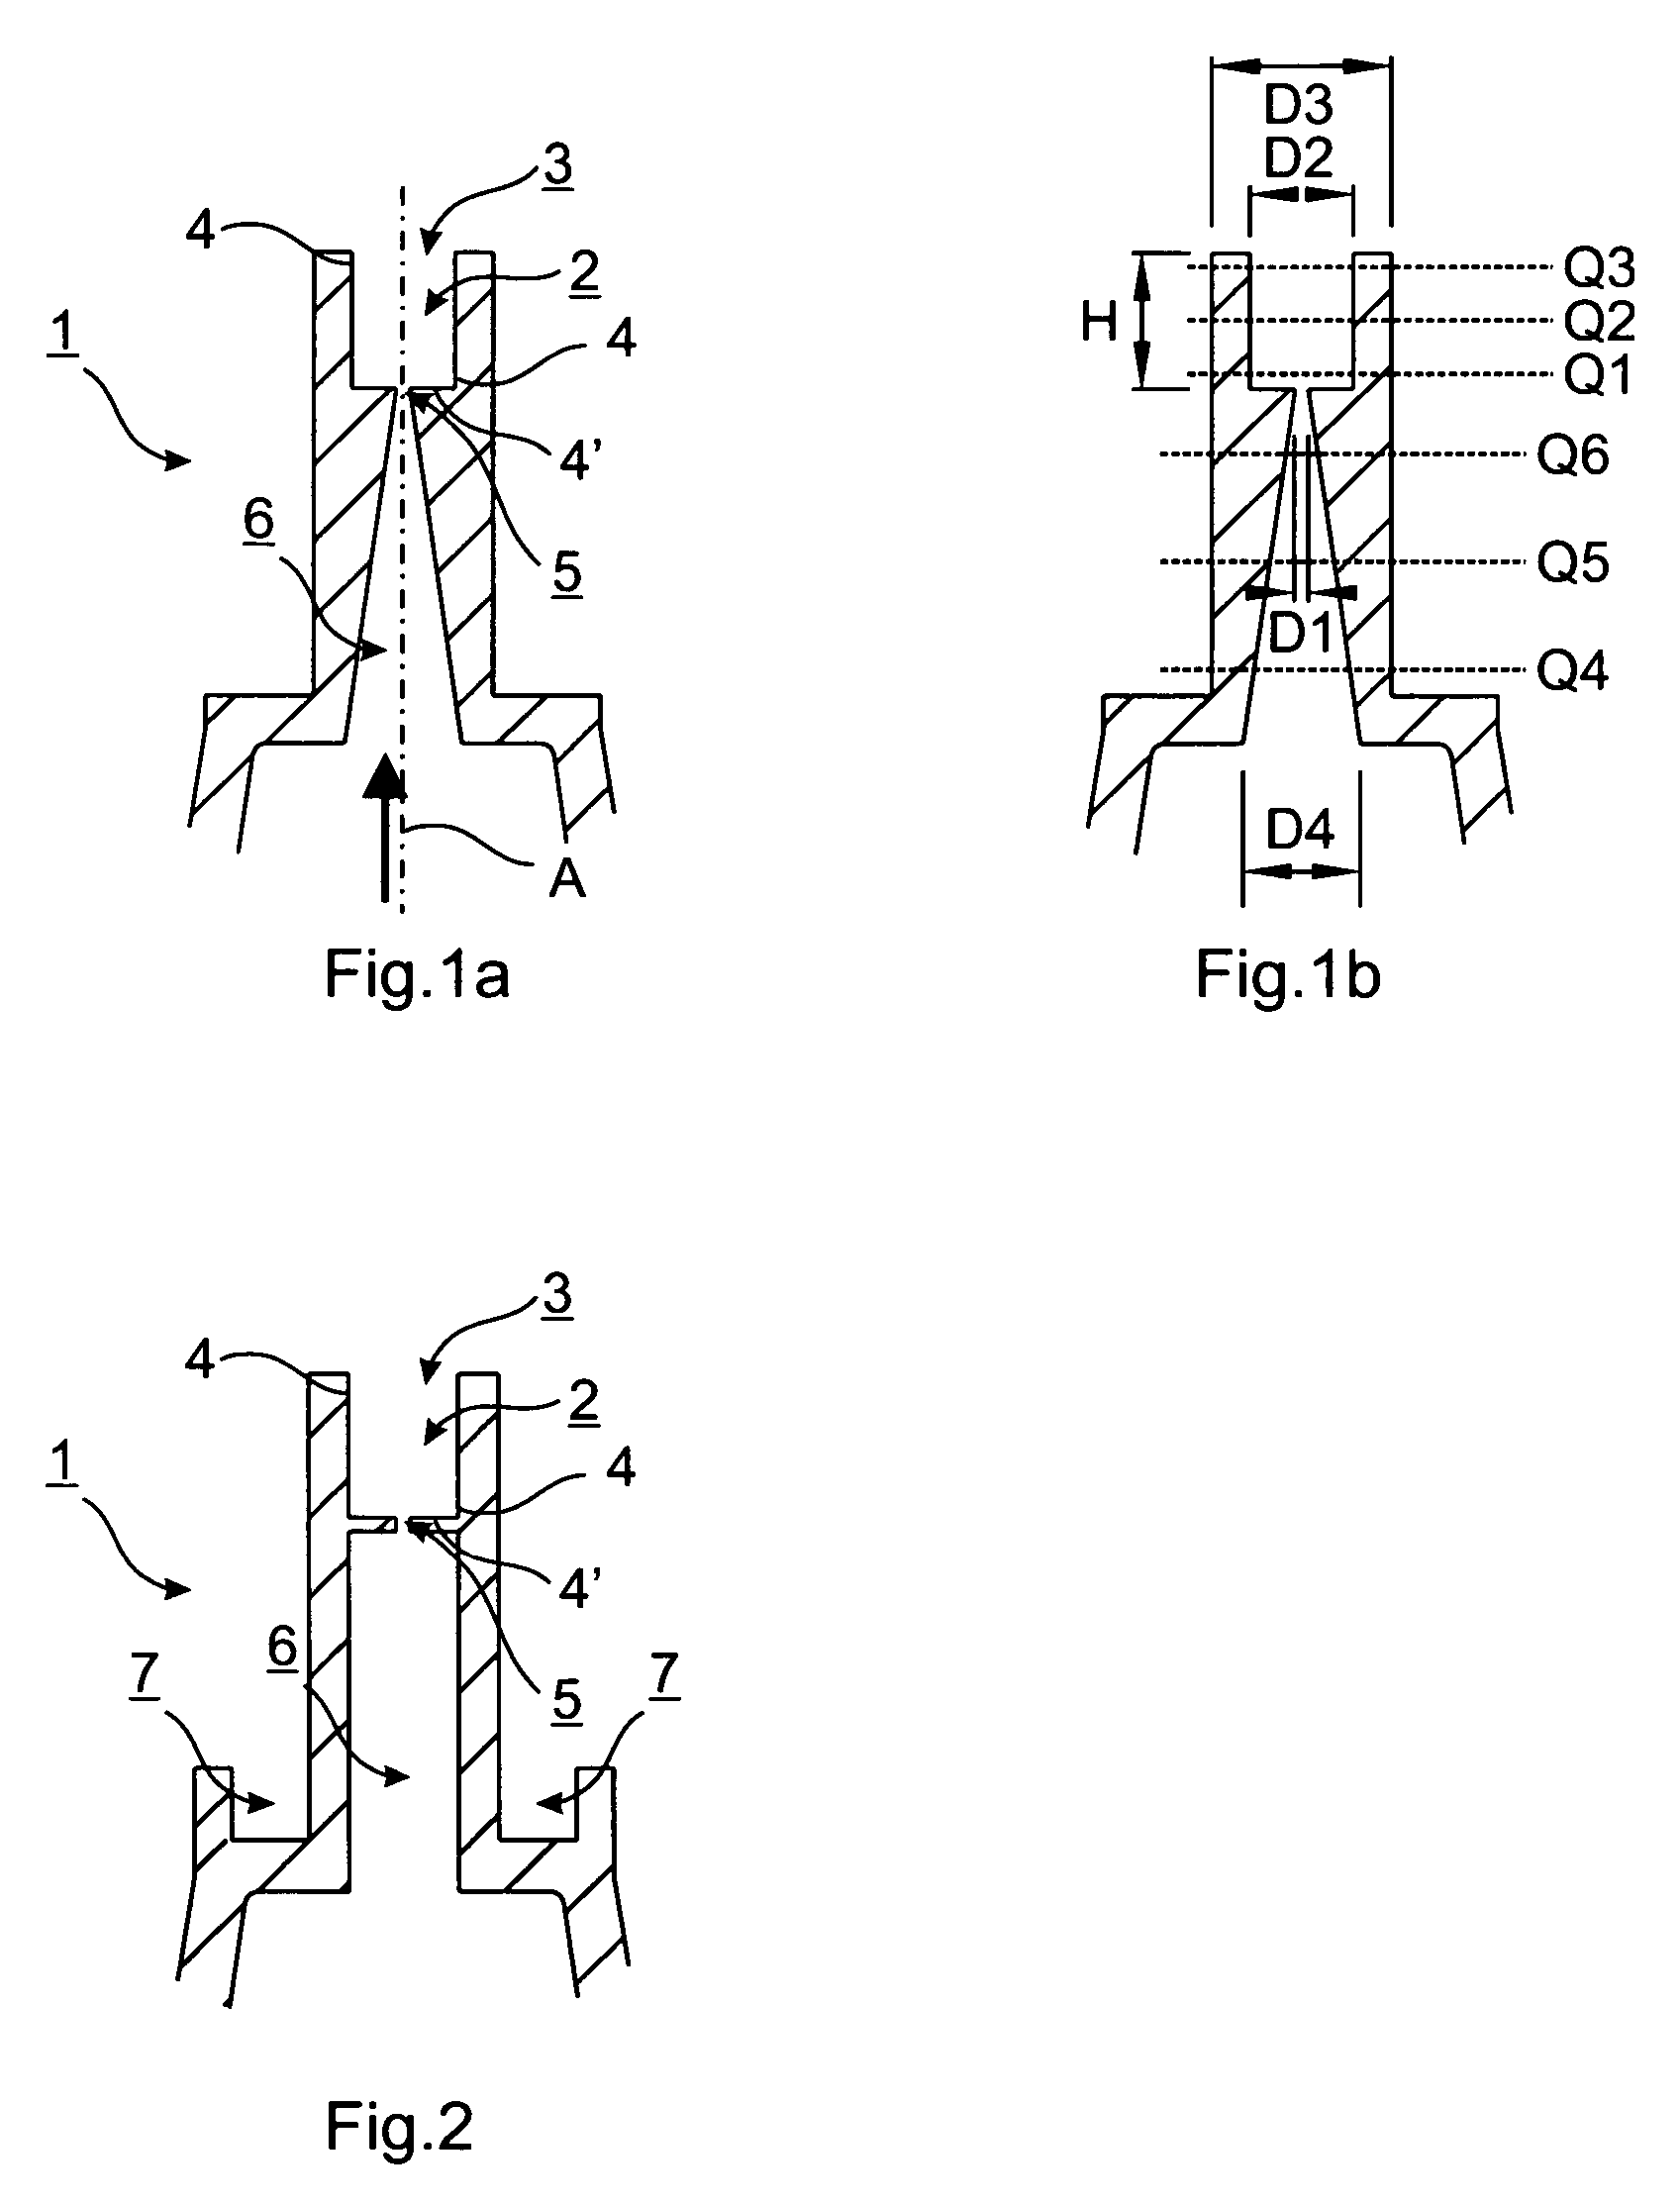 Storage/dispensing system and method for the application of a flowable substance